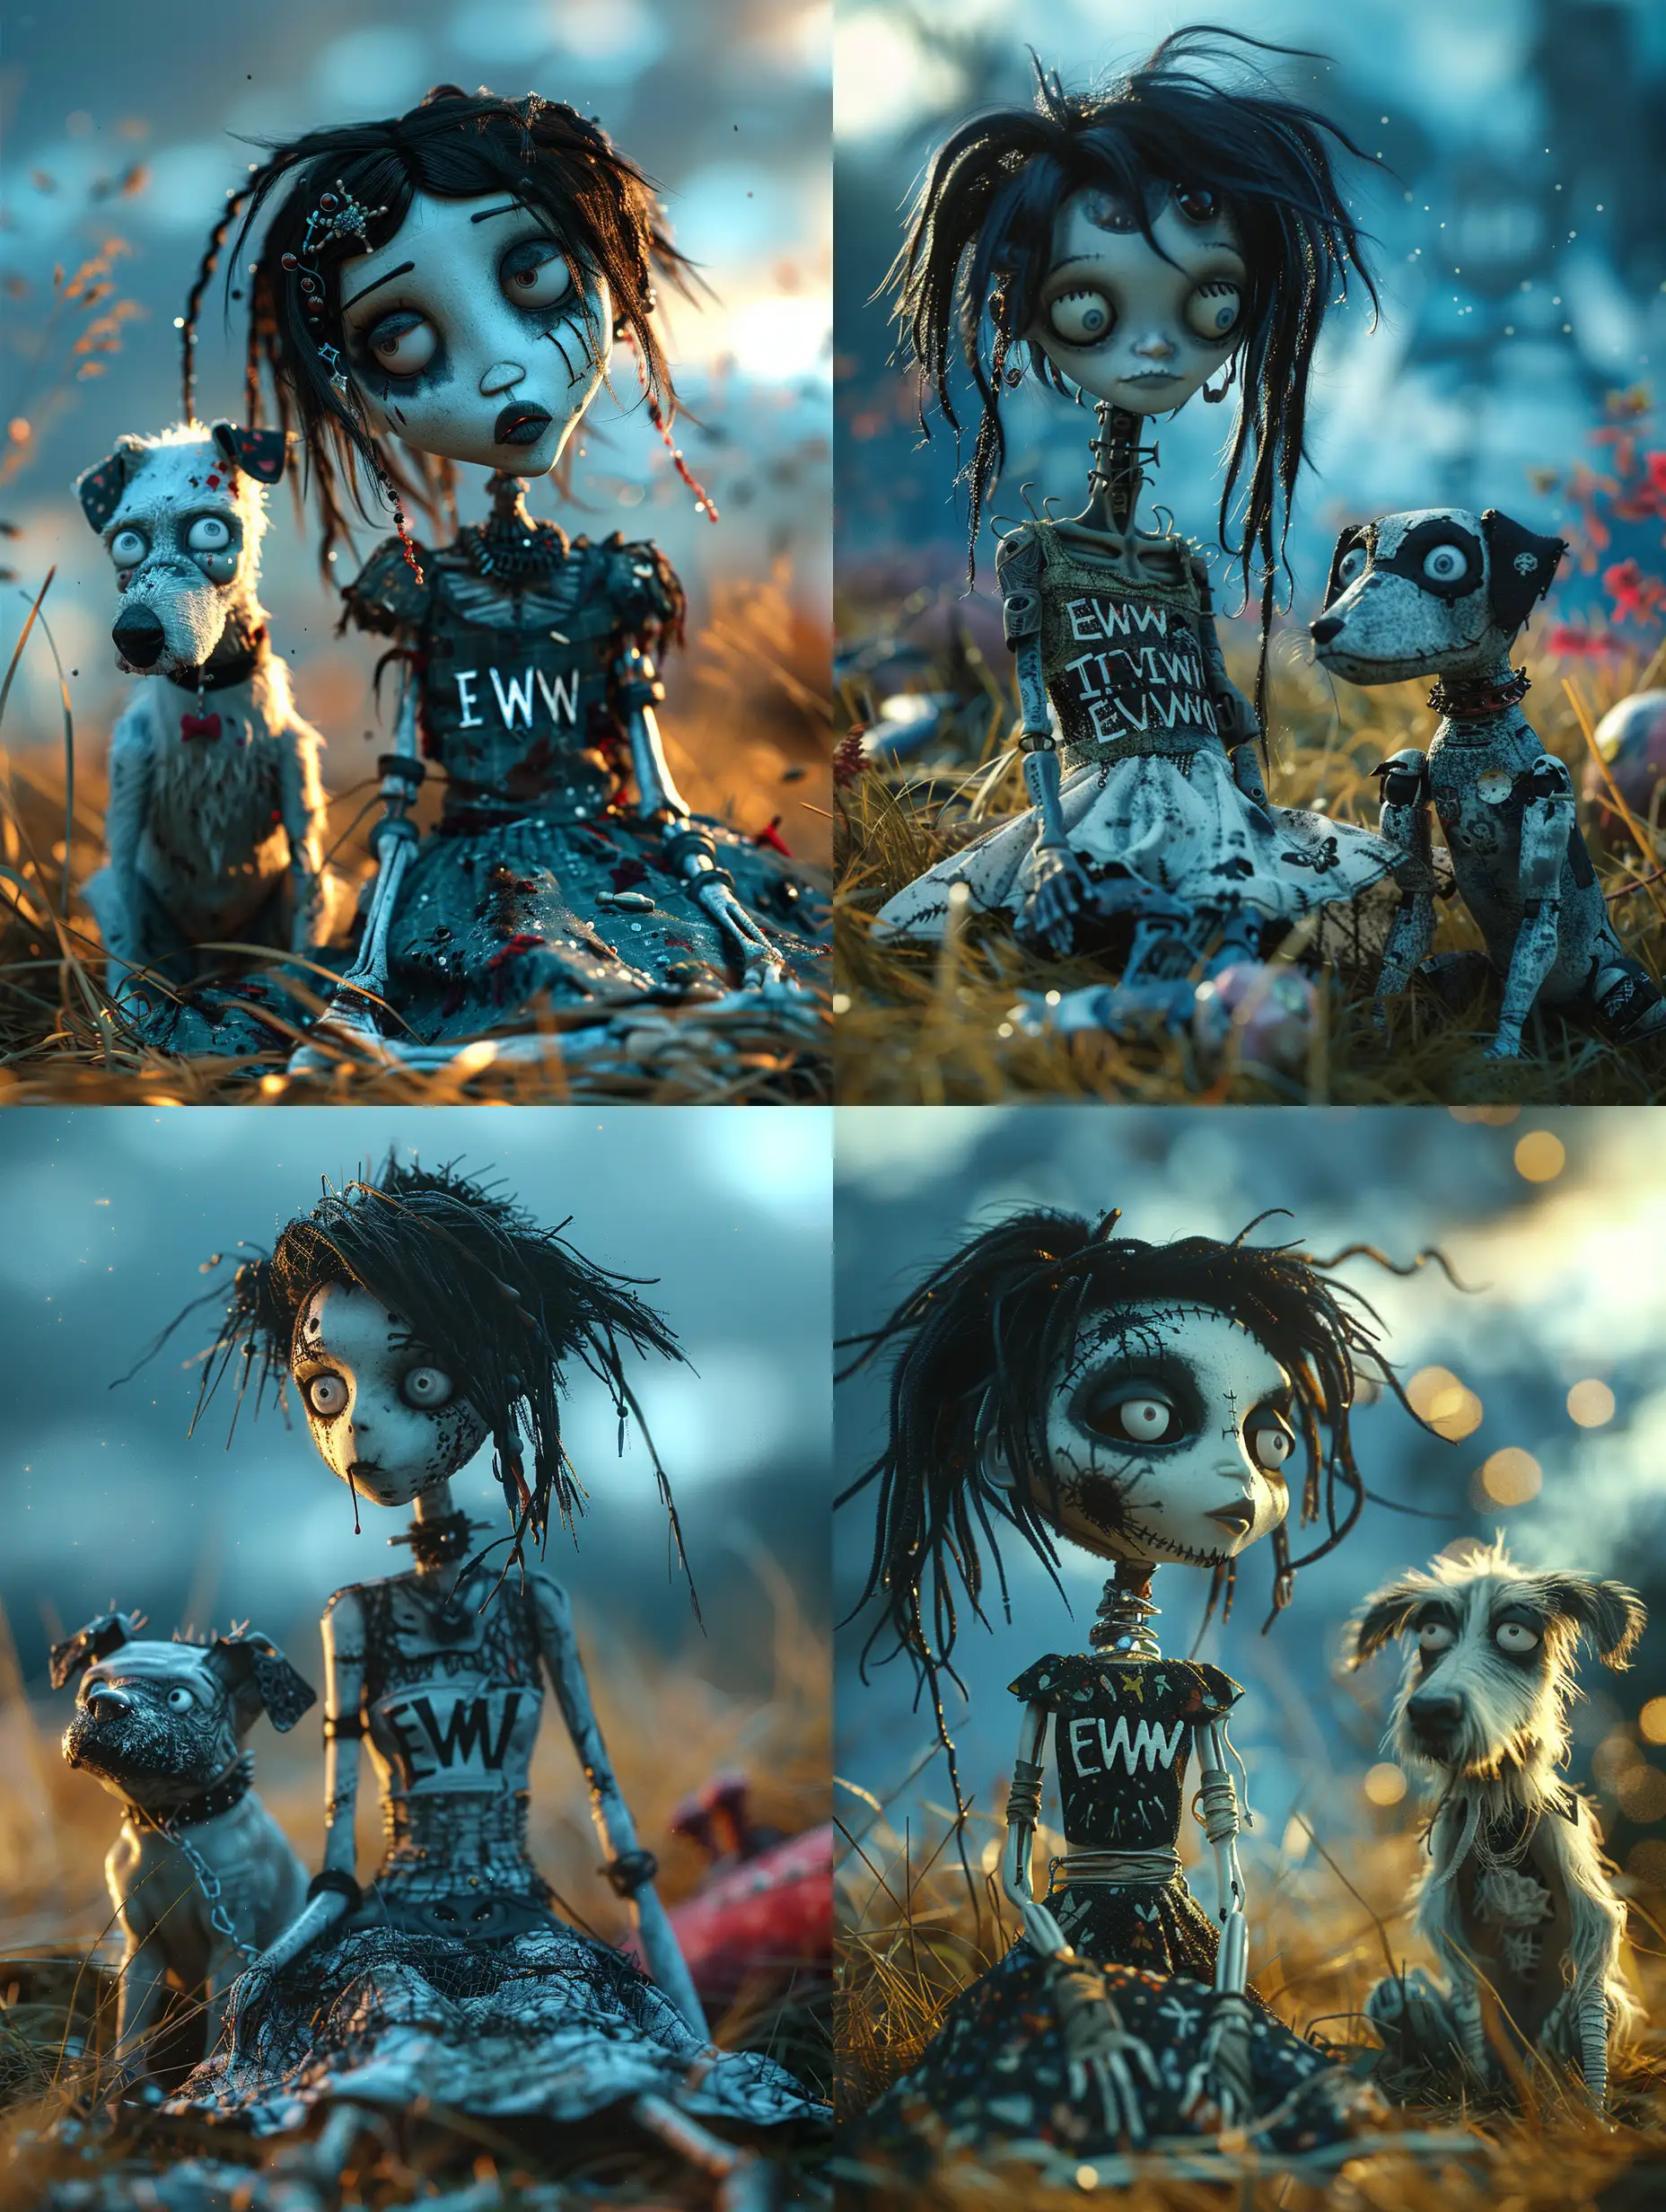 Fantasy-Voodoo-Doll-and-Frankenweenie-Dog-in-Surreal-Field-Grass-Scene